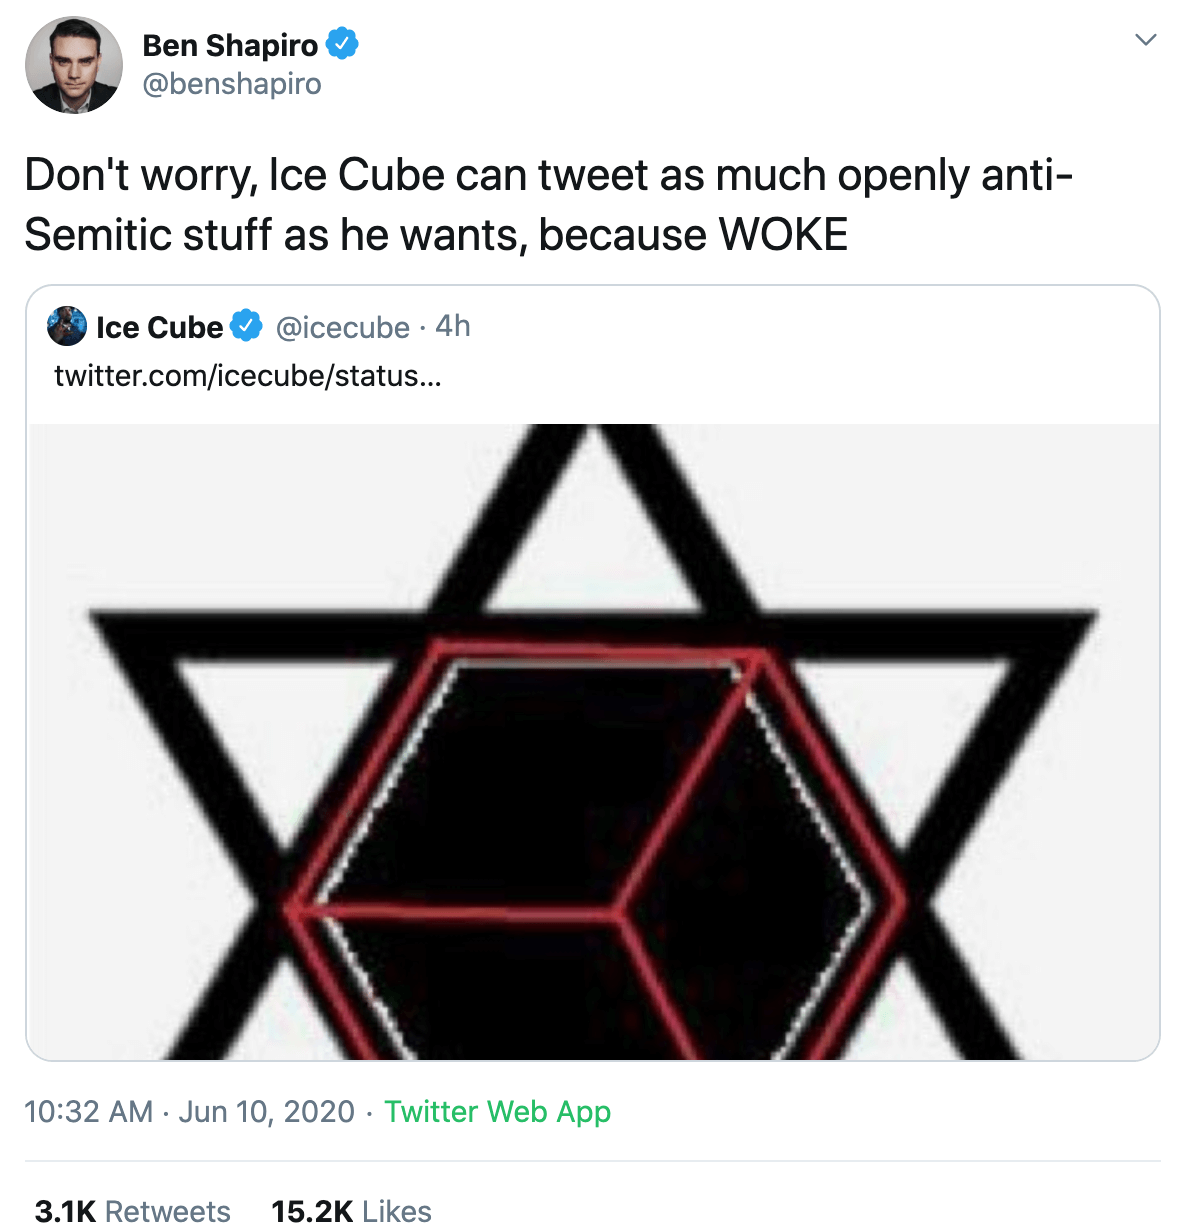 Ice Cube tweets more anti-Semitic imagery, defends practice